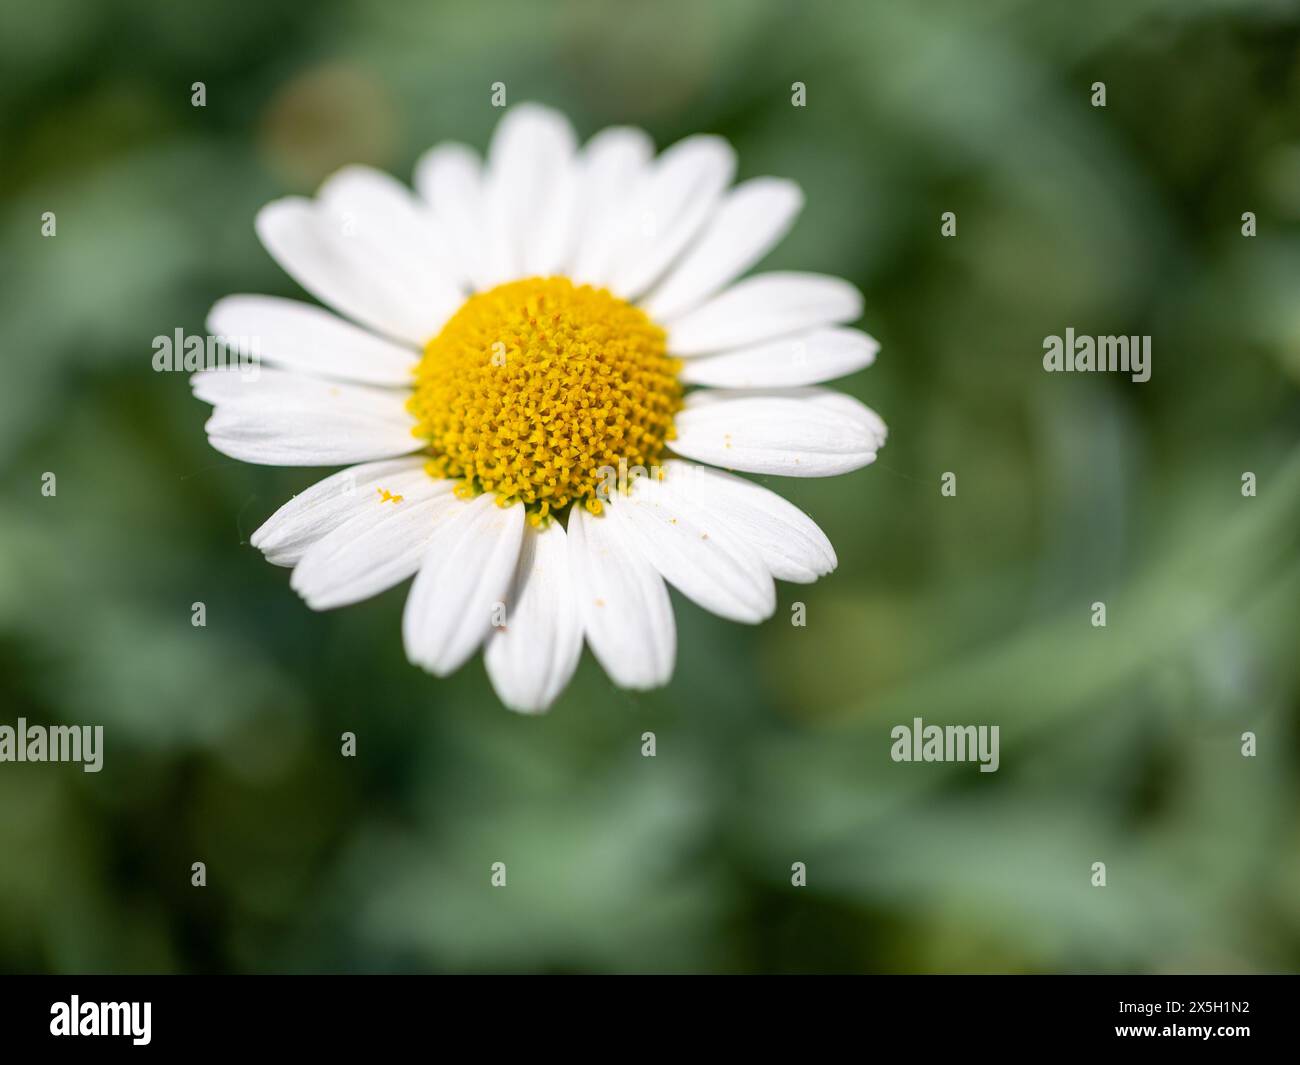 Close-up of a wild daisy flower (Leucanthemum vulgare), white chamomile on green blurred background. Stock Photo